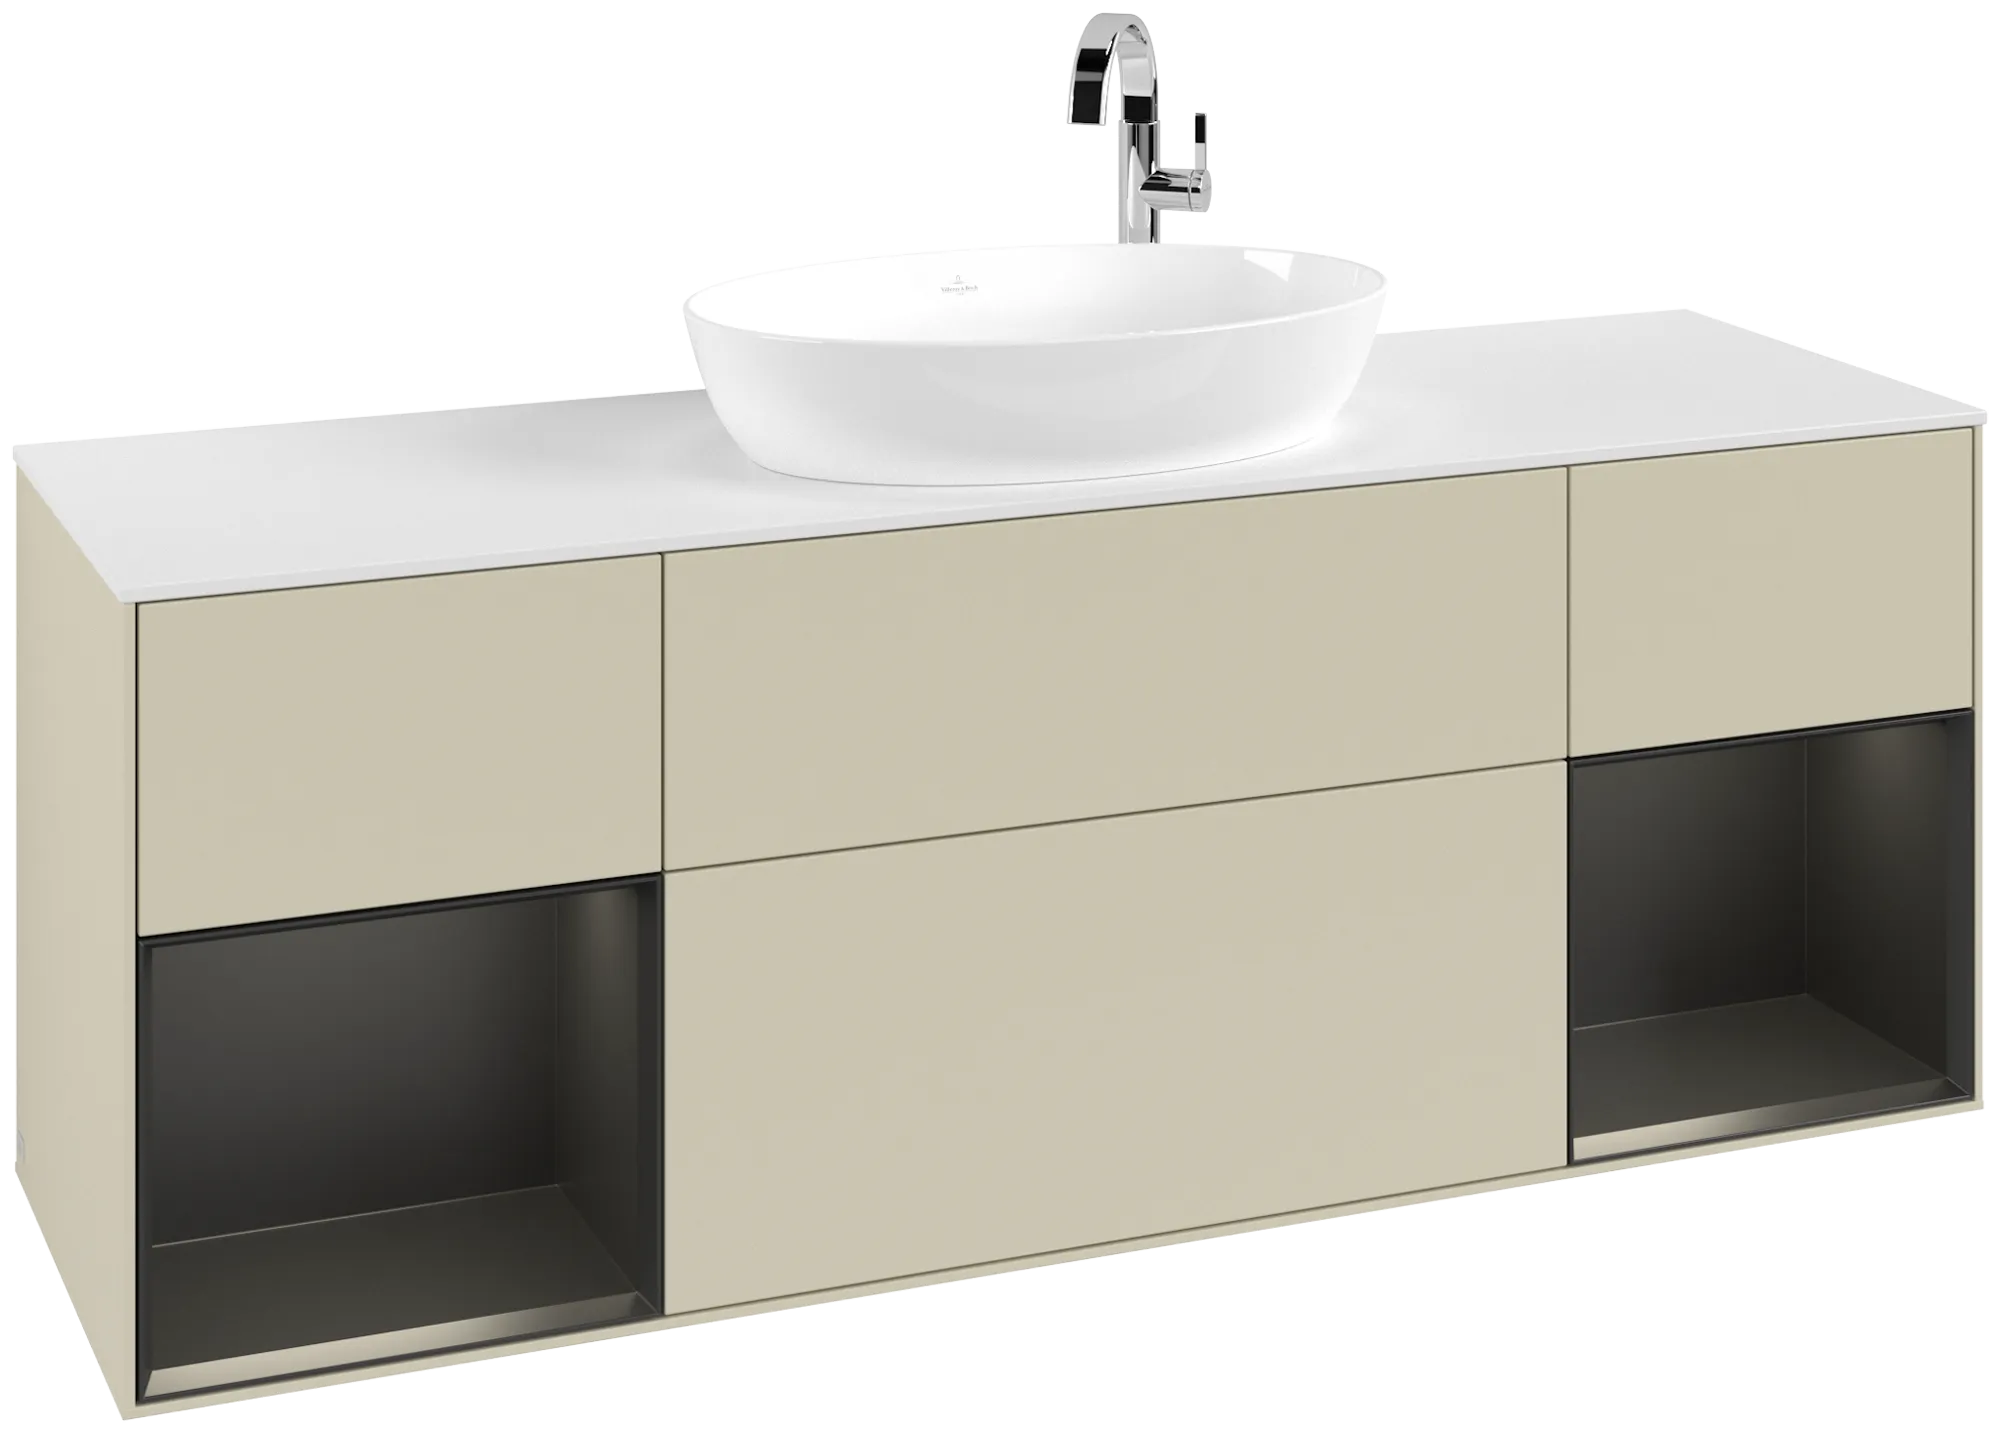 Picture of VILLEROY BOCH Finion Vanity unit, with lighting, 4 pull-out compartments, 1600 x 603 x 501 mm, Silk Grey Matt Lacquer / Black Matt Lacquer / Glass White Matt #G981PDHJ